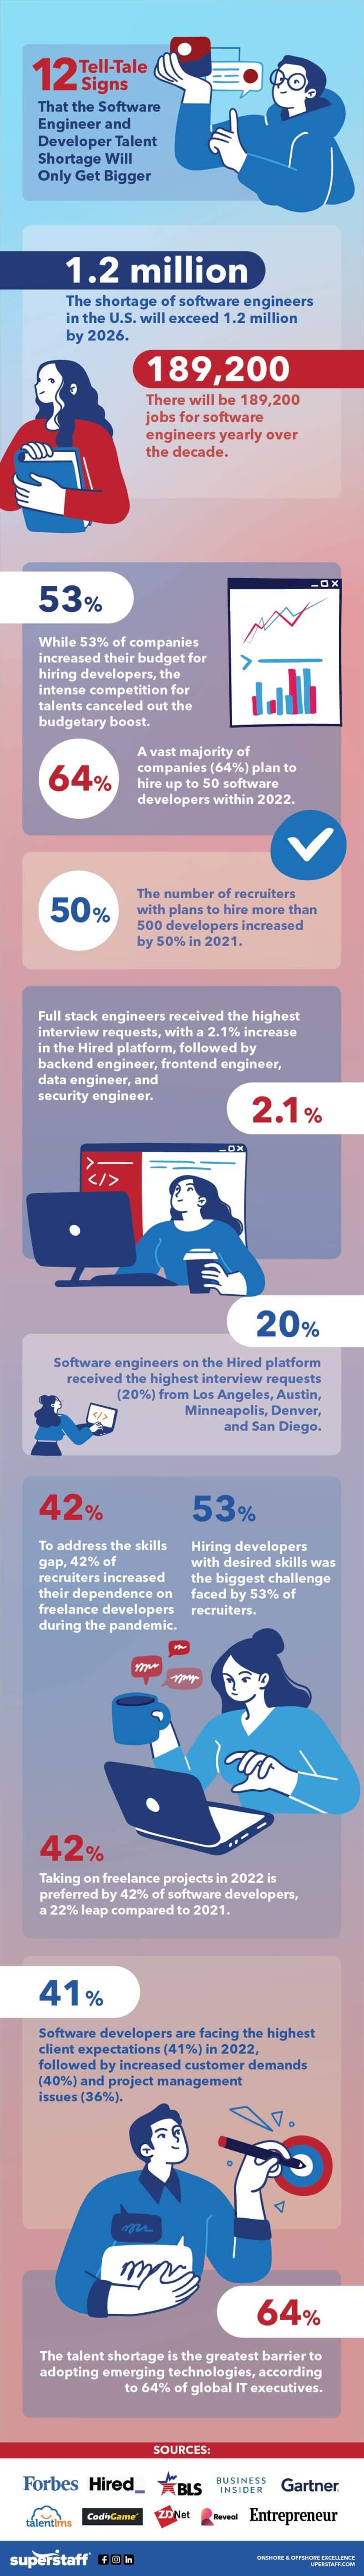 12 Signs that Software Engineers and Developers Shortage Will Only Get Bigger